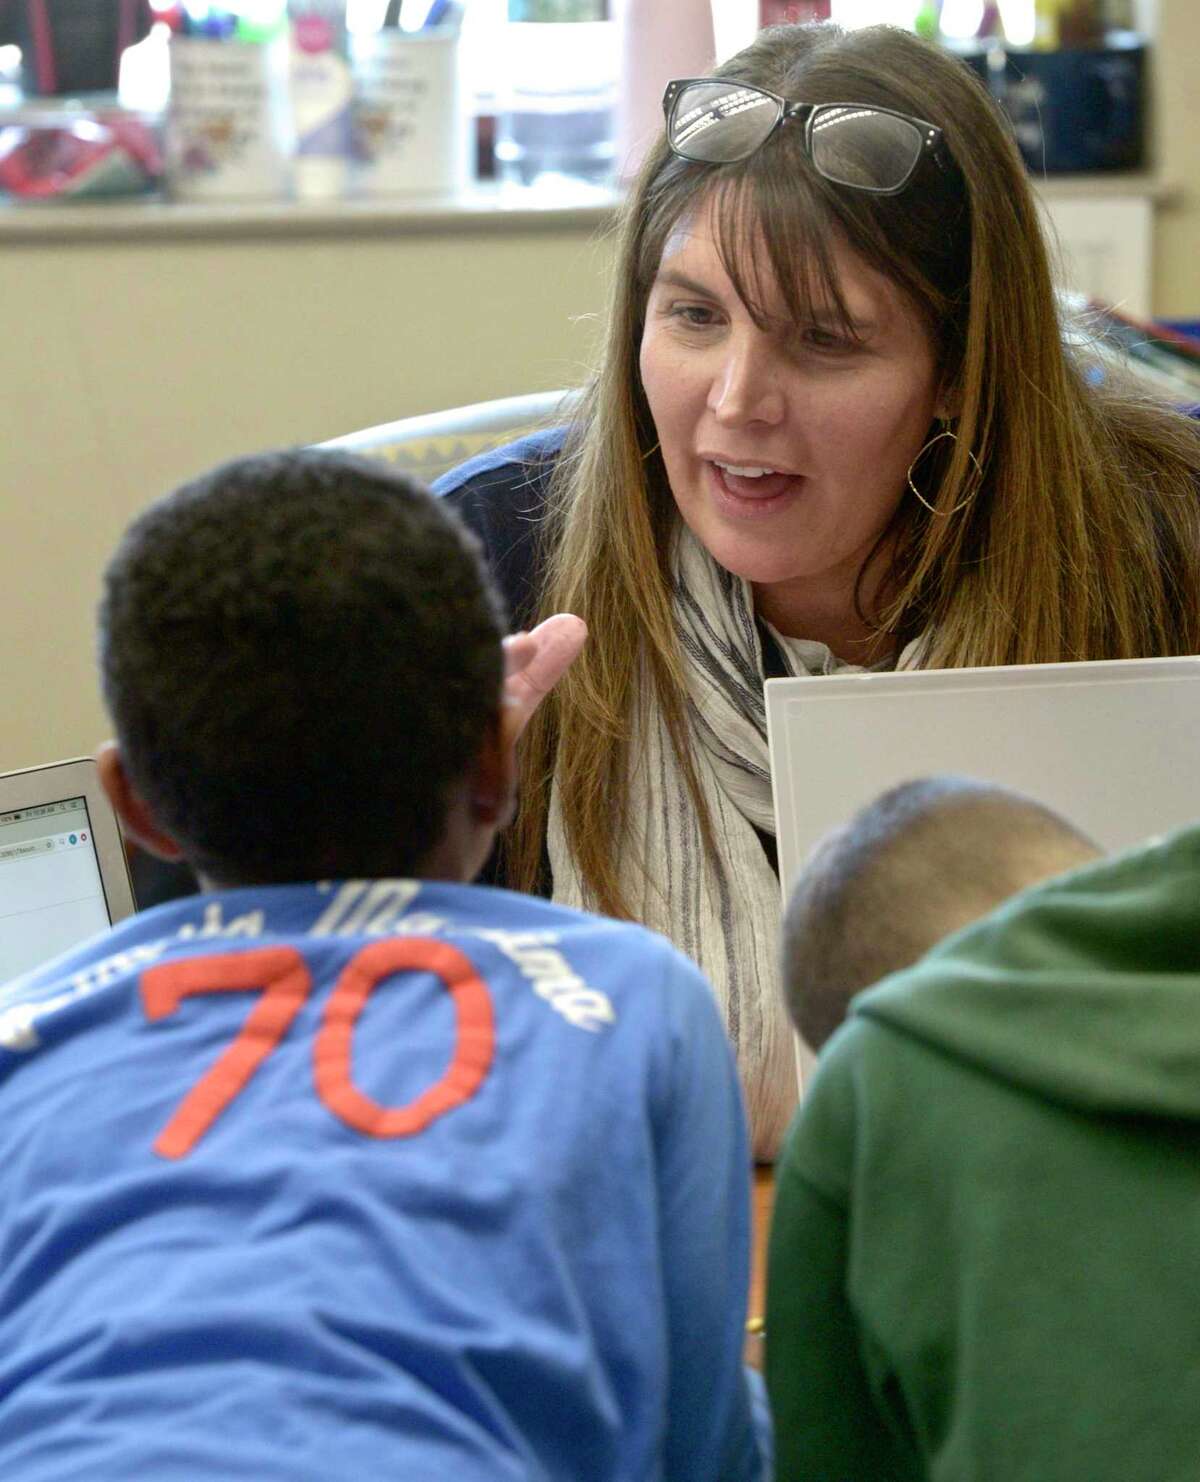 Second Grade teacher Kathy Hamilton works with students at Ellsworth Avenue Elementary school using ELL strategies in the classroom. Friday, February 28, 2020, in Danbury, Conn.